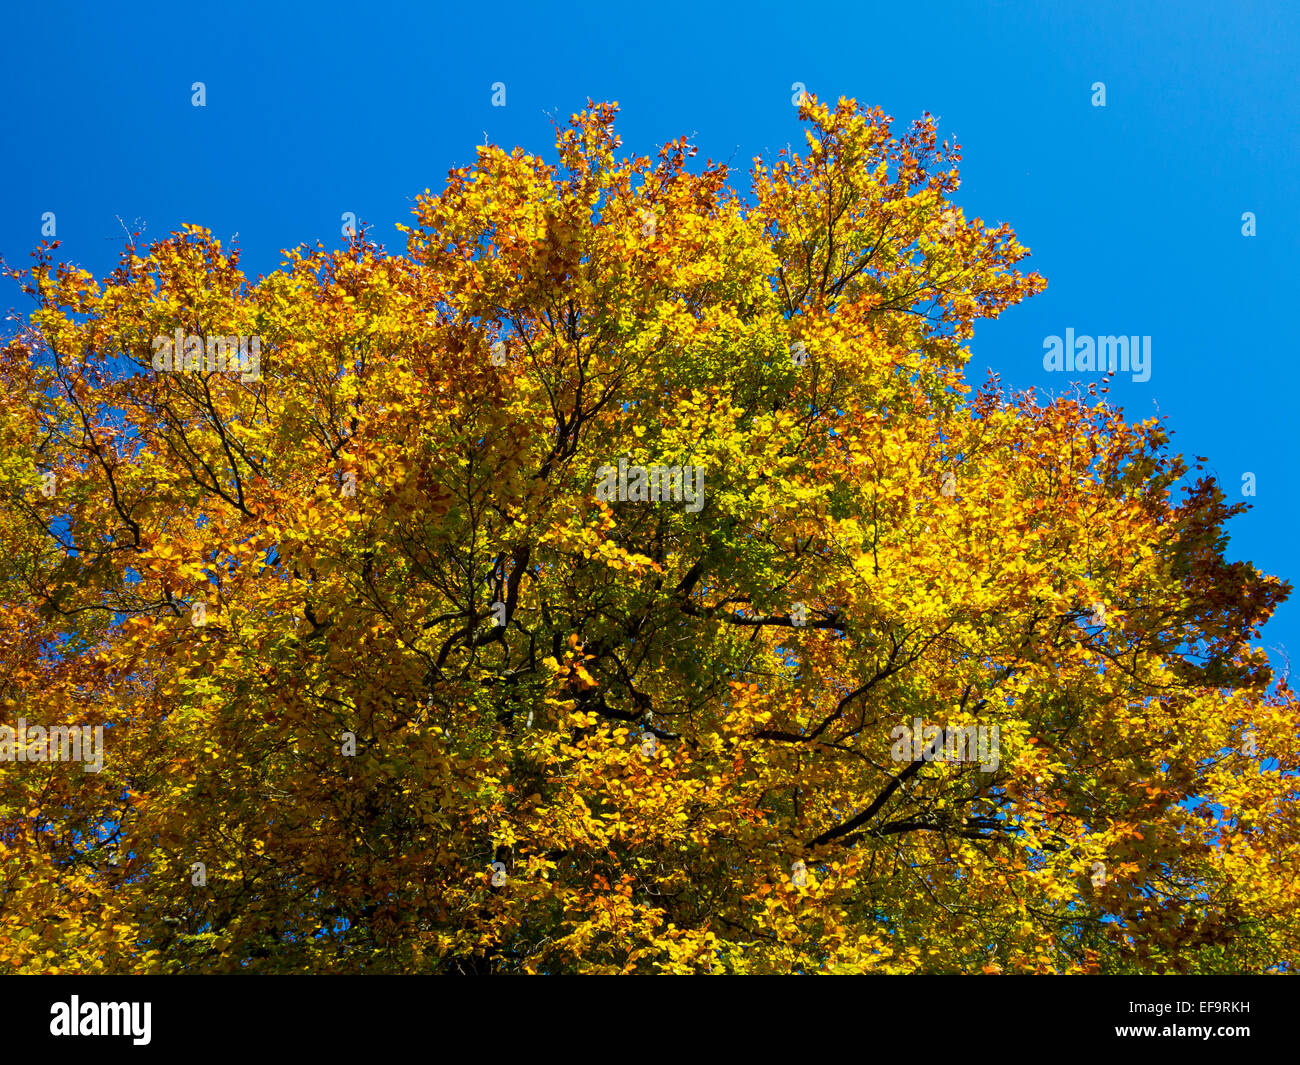 View looking up at branches of a tree in autumn sunshine with leaves showing golden colours against a clear blue sky Stock Photo